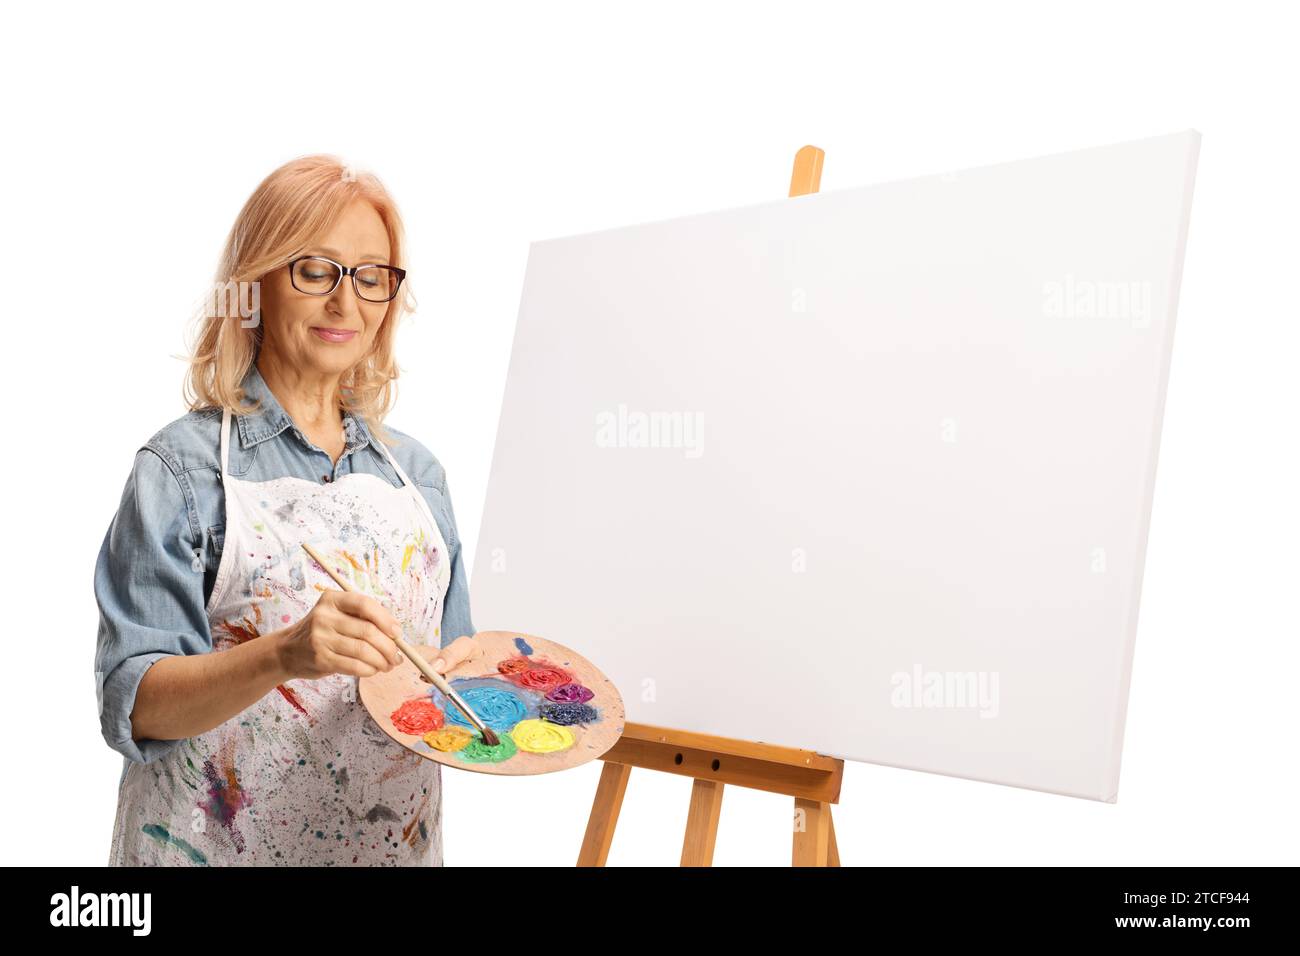 Woman holding a painting brush and palette with acrylic paint next to a blank canvas isolated on white background Stock Photo